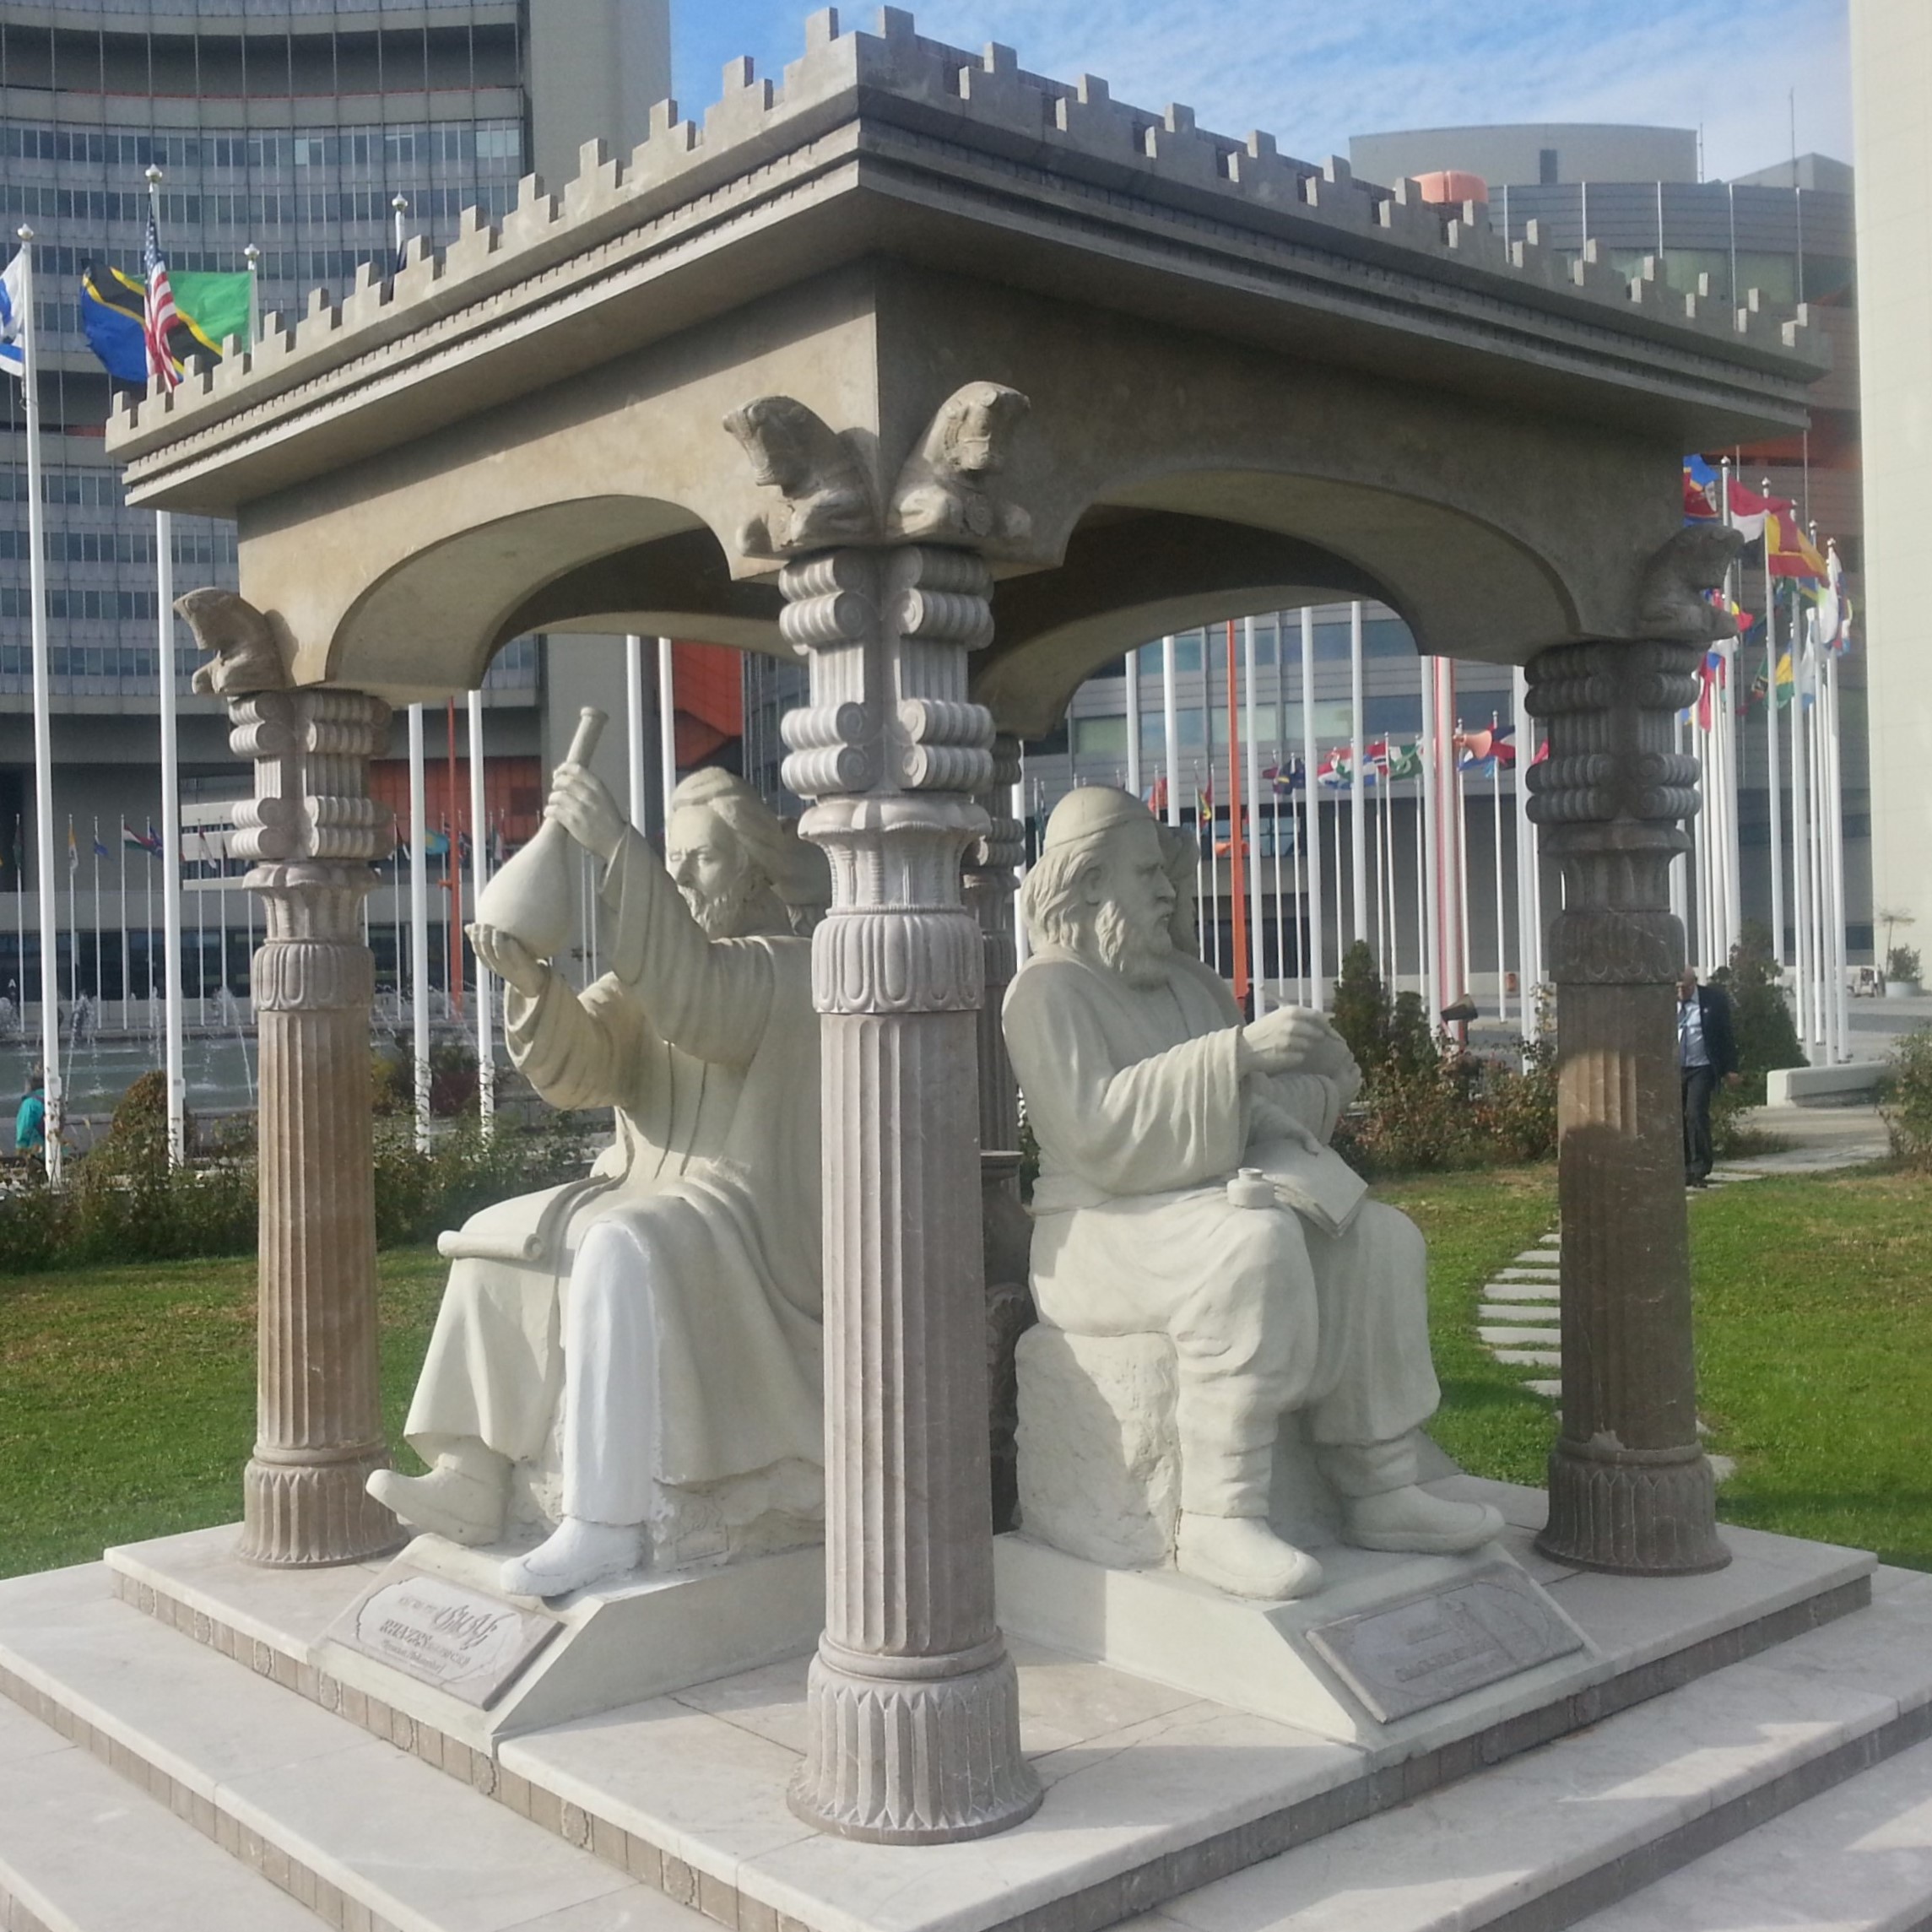 Statues of four Persian medieval scholars in Vienna